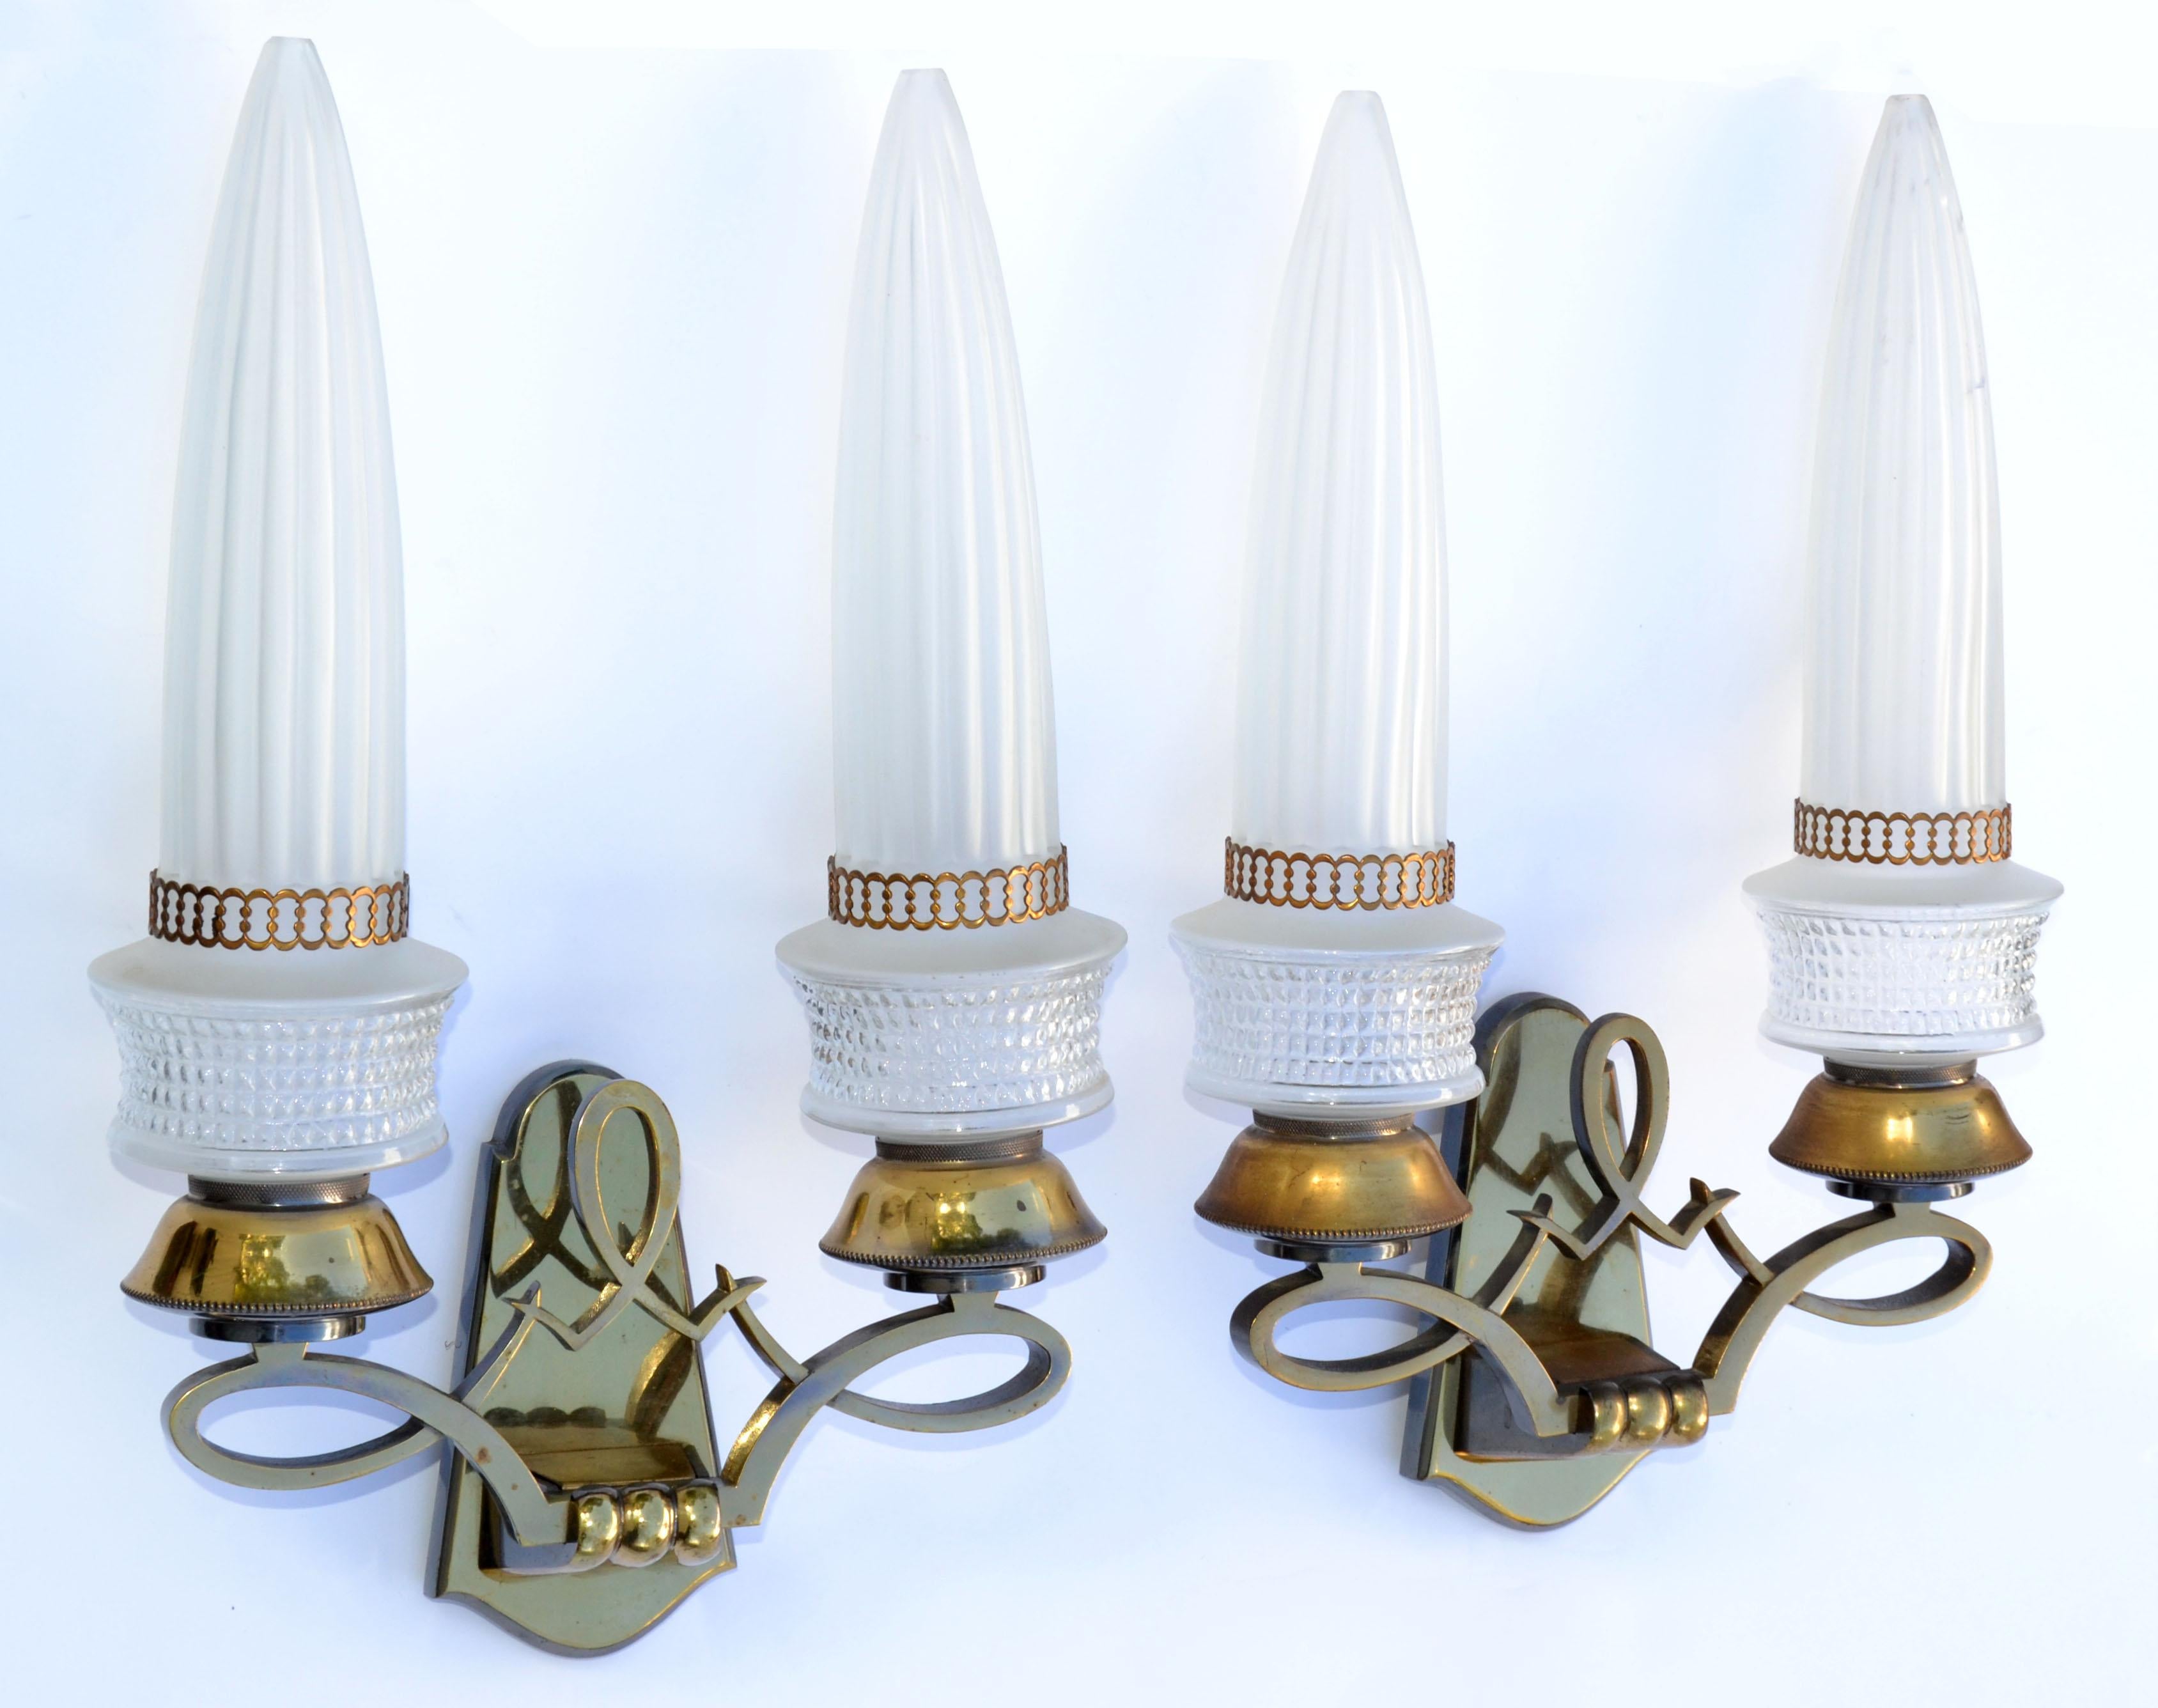 Classic and elegant Art Deco original Maison Liberos Bronze Sconces with the original Glass Shades made in Paris circa 1950s.
Foil Label inside the Back Plate: Creation Liberos Paris.
We have 3 Sconces available, priced by pair.
Working condition